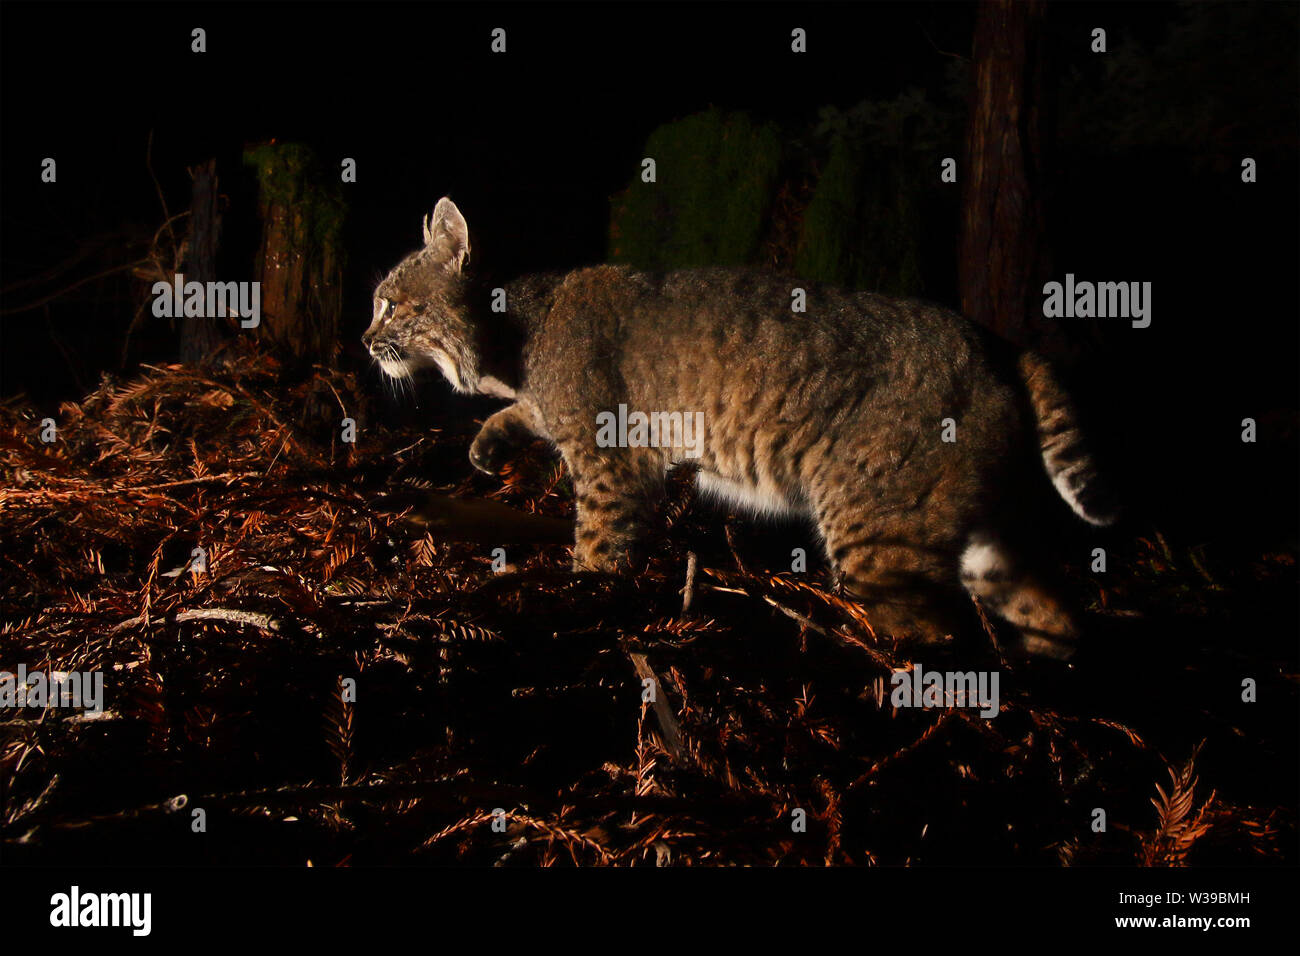 A Bobcat sneaking through a redwood forest while hunting Stock Photo